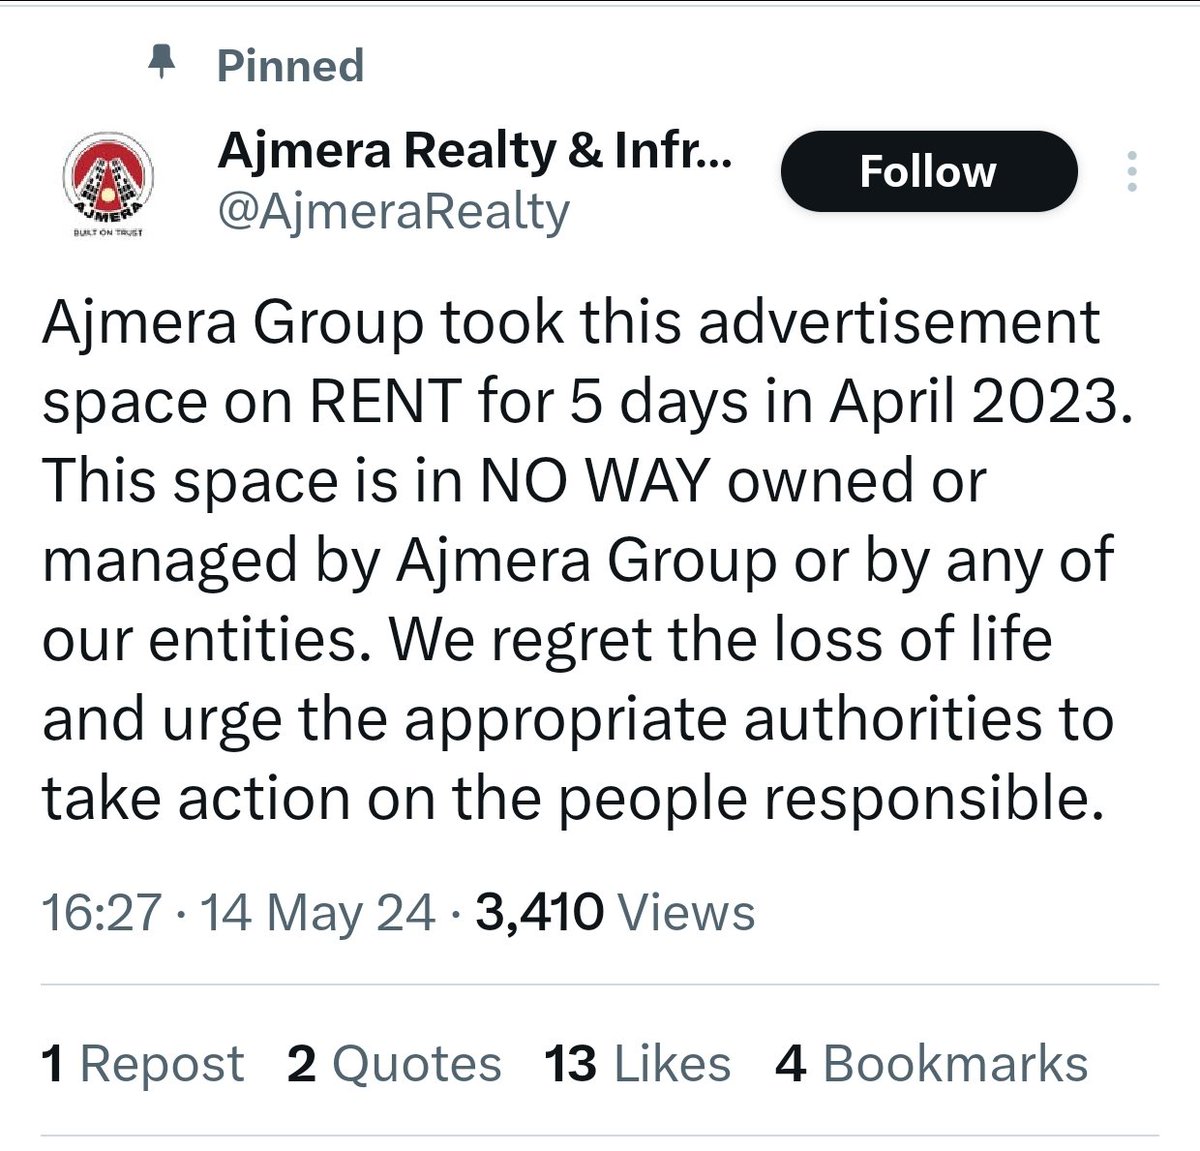 Here is a Clarification from @AjmeraRealty